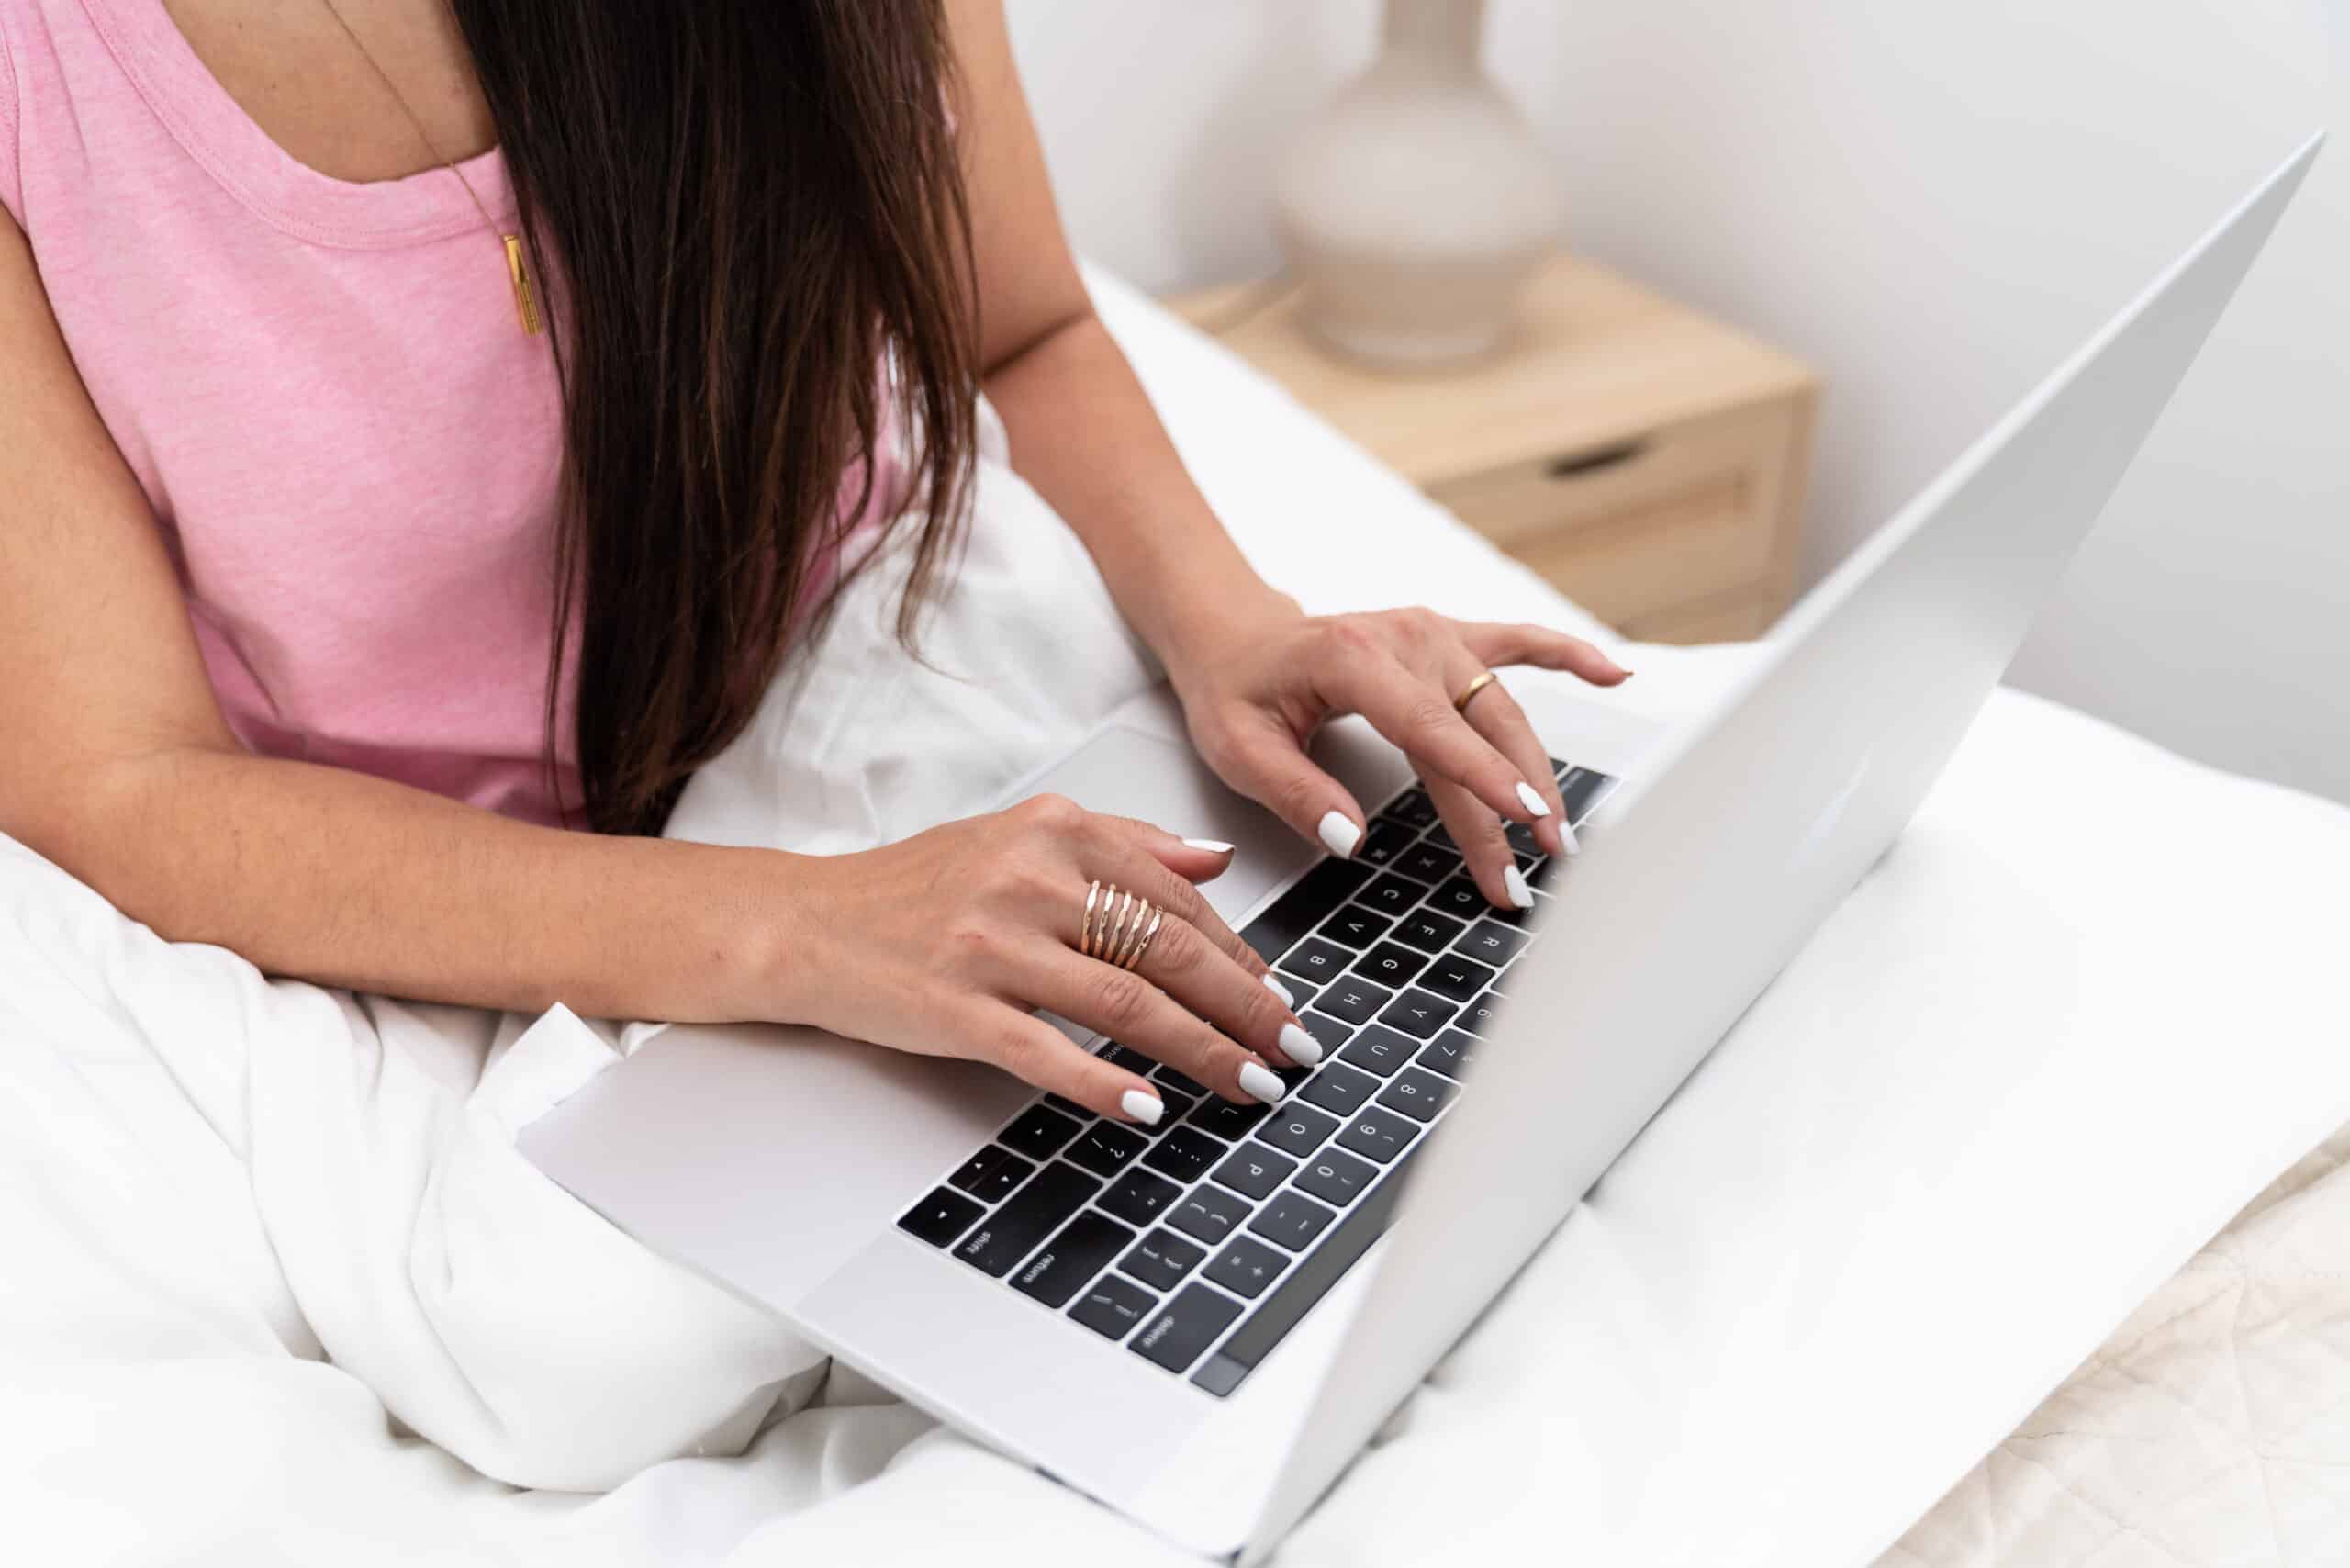 An accomplished web designer effortlessly typing away on her laptop in the comforts of her bed, equipped to build a stunning website for clients on the Gold Coast.